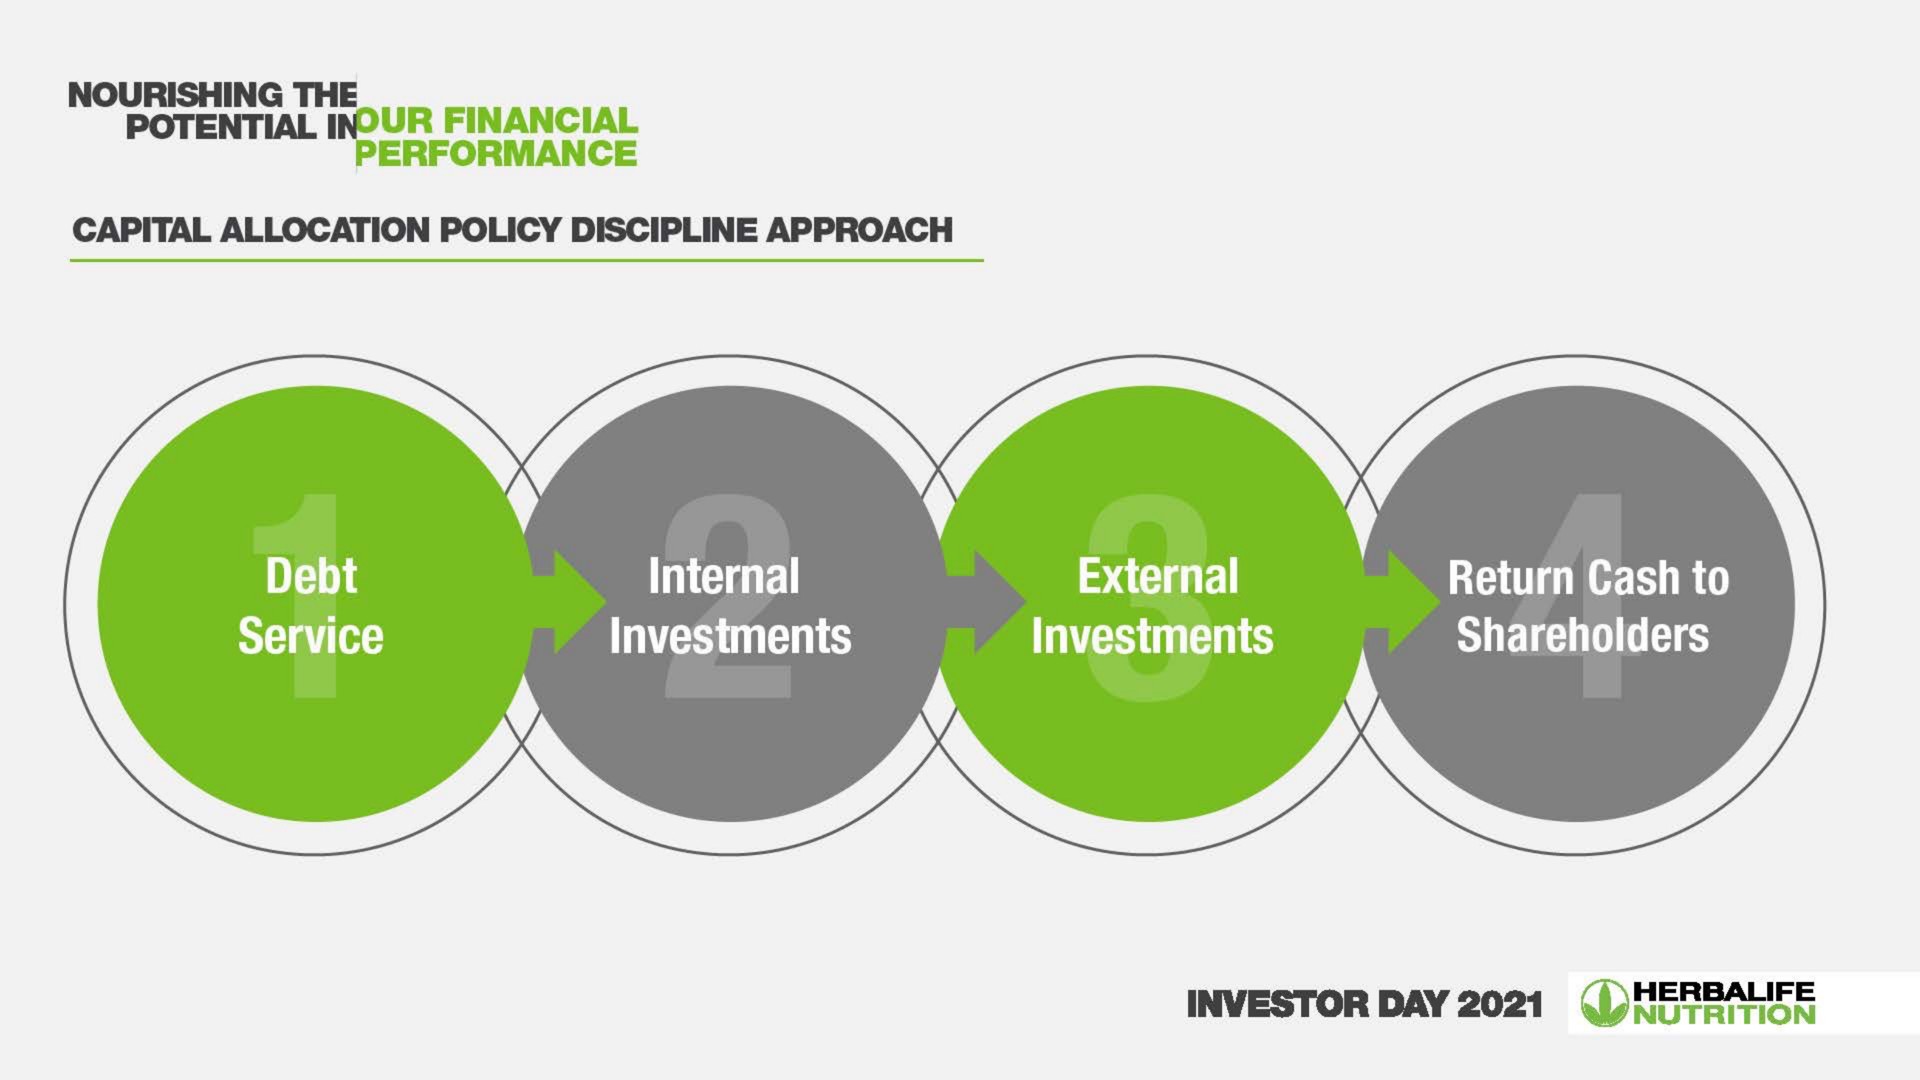 a service internal investments sats tae i shareholders investor day | Herbalife